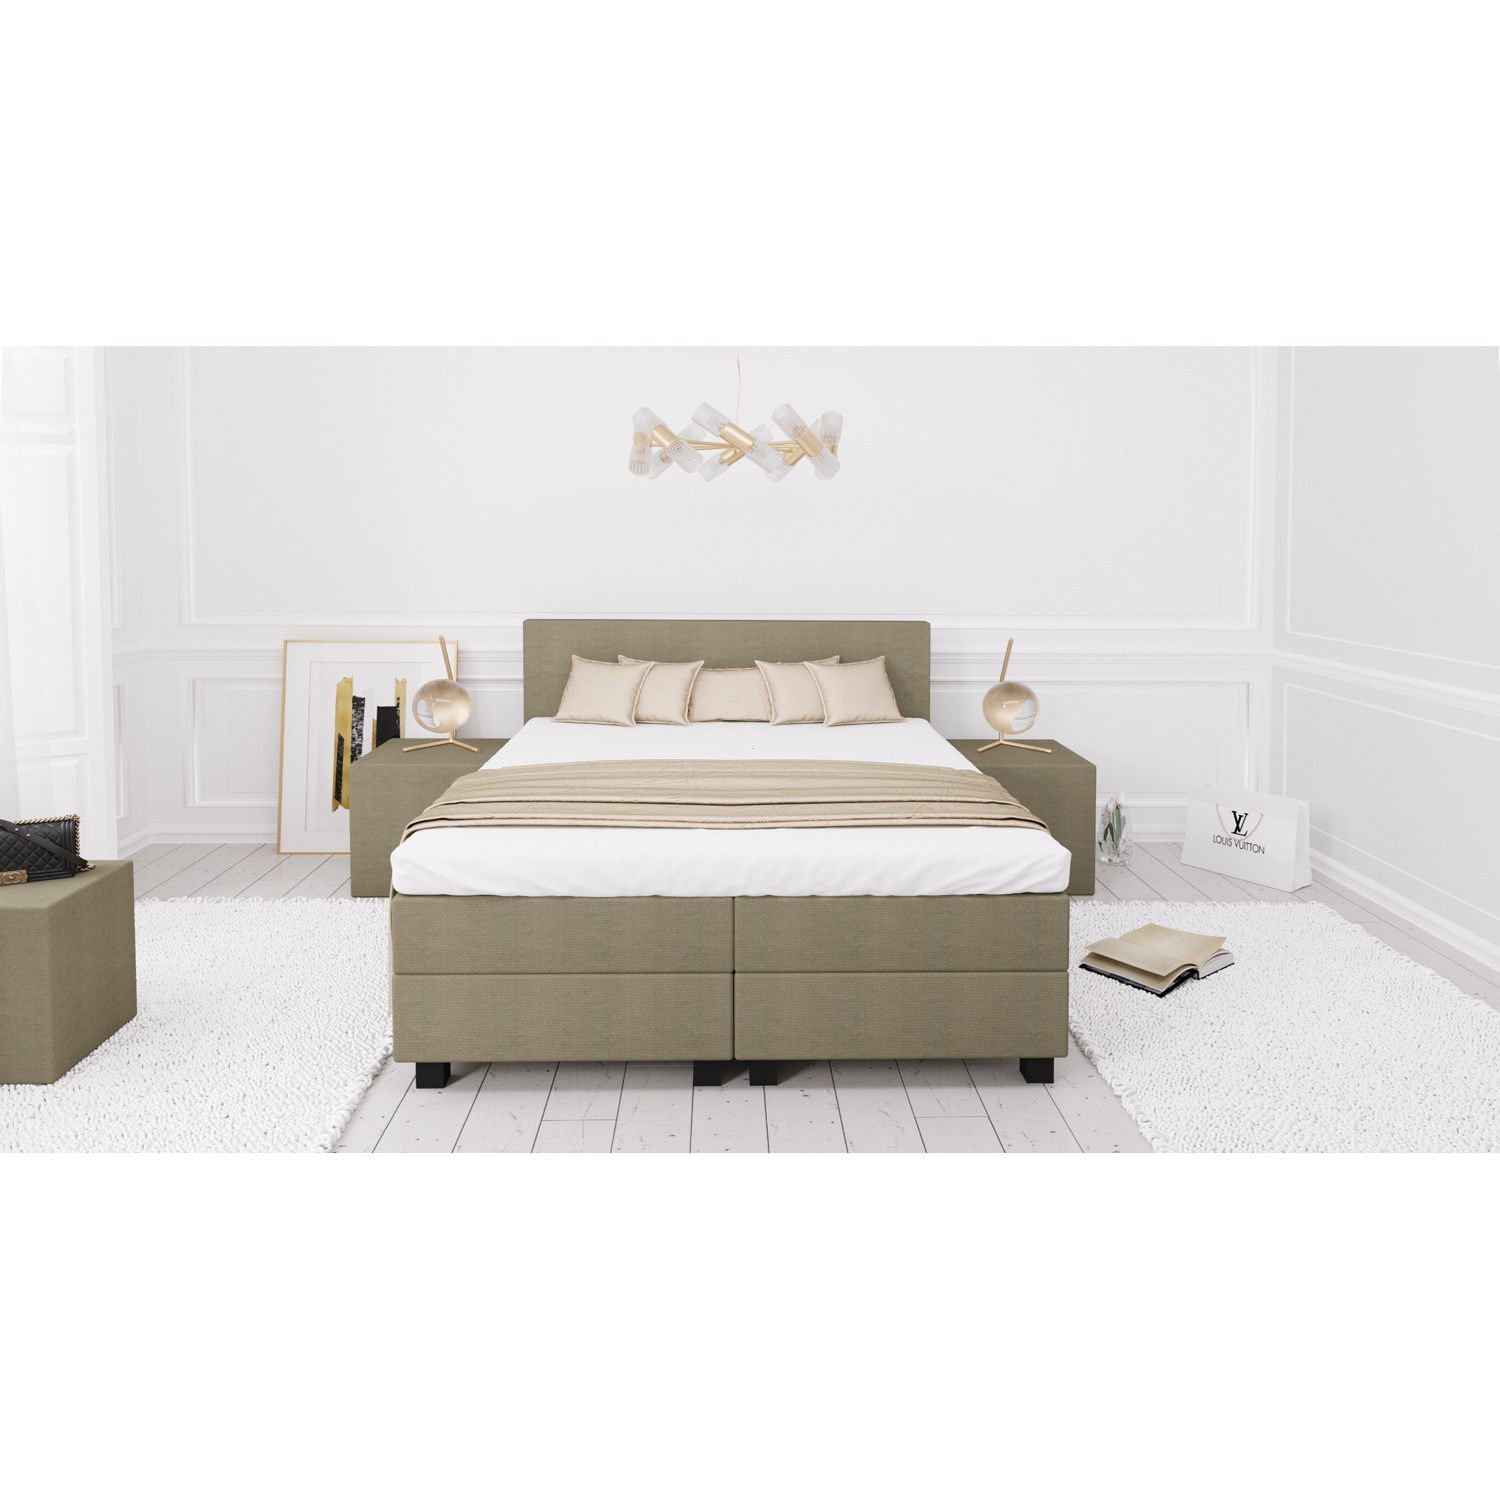 Boxspring set Holmstad de Luxe - Taupe